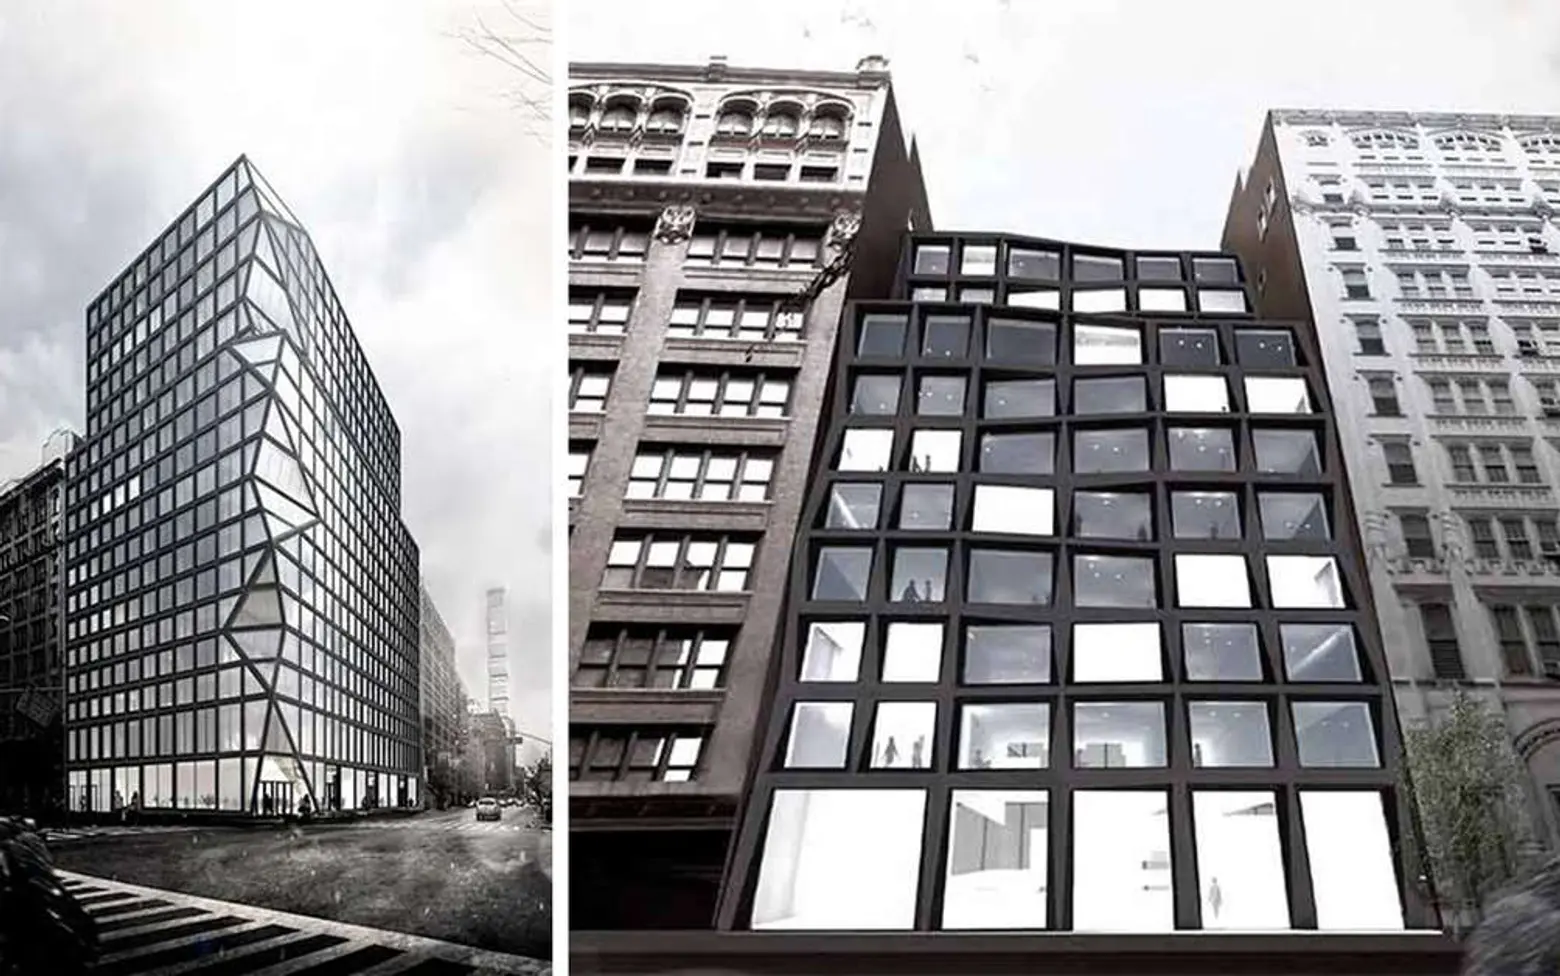 Revealed: Rem Koolhaas’ First NYC Building in Gramercy